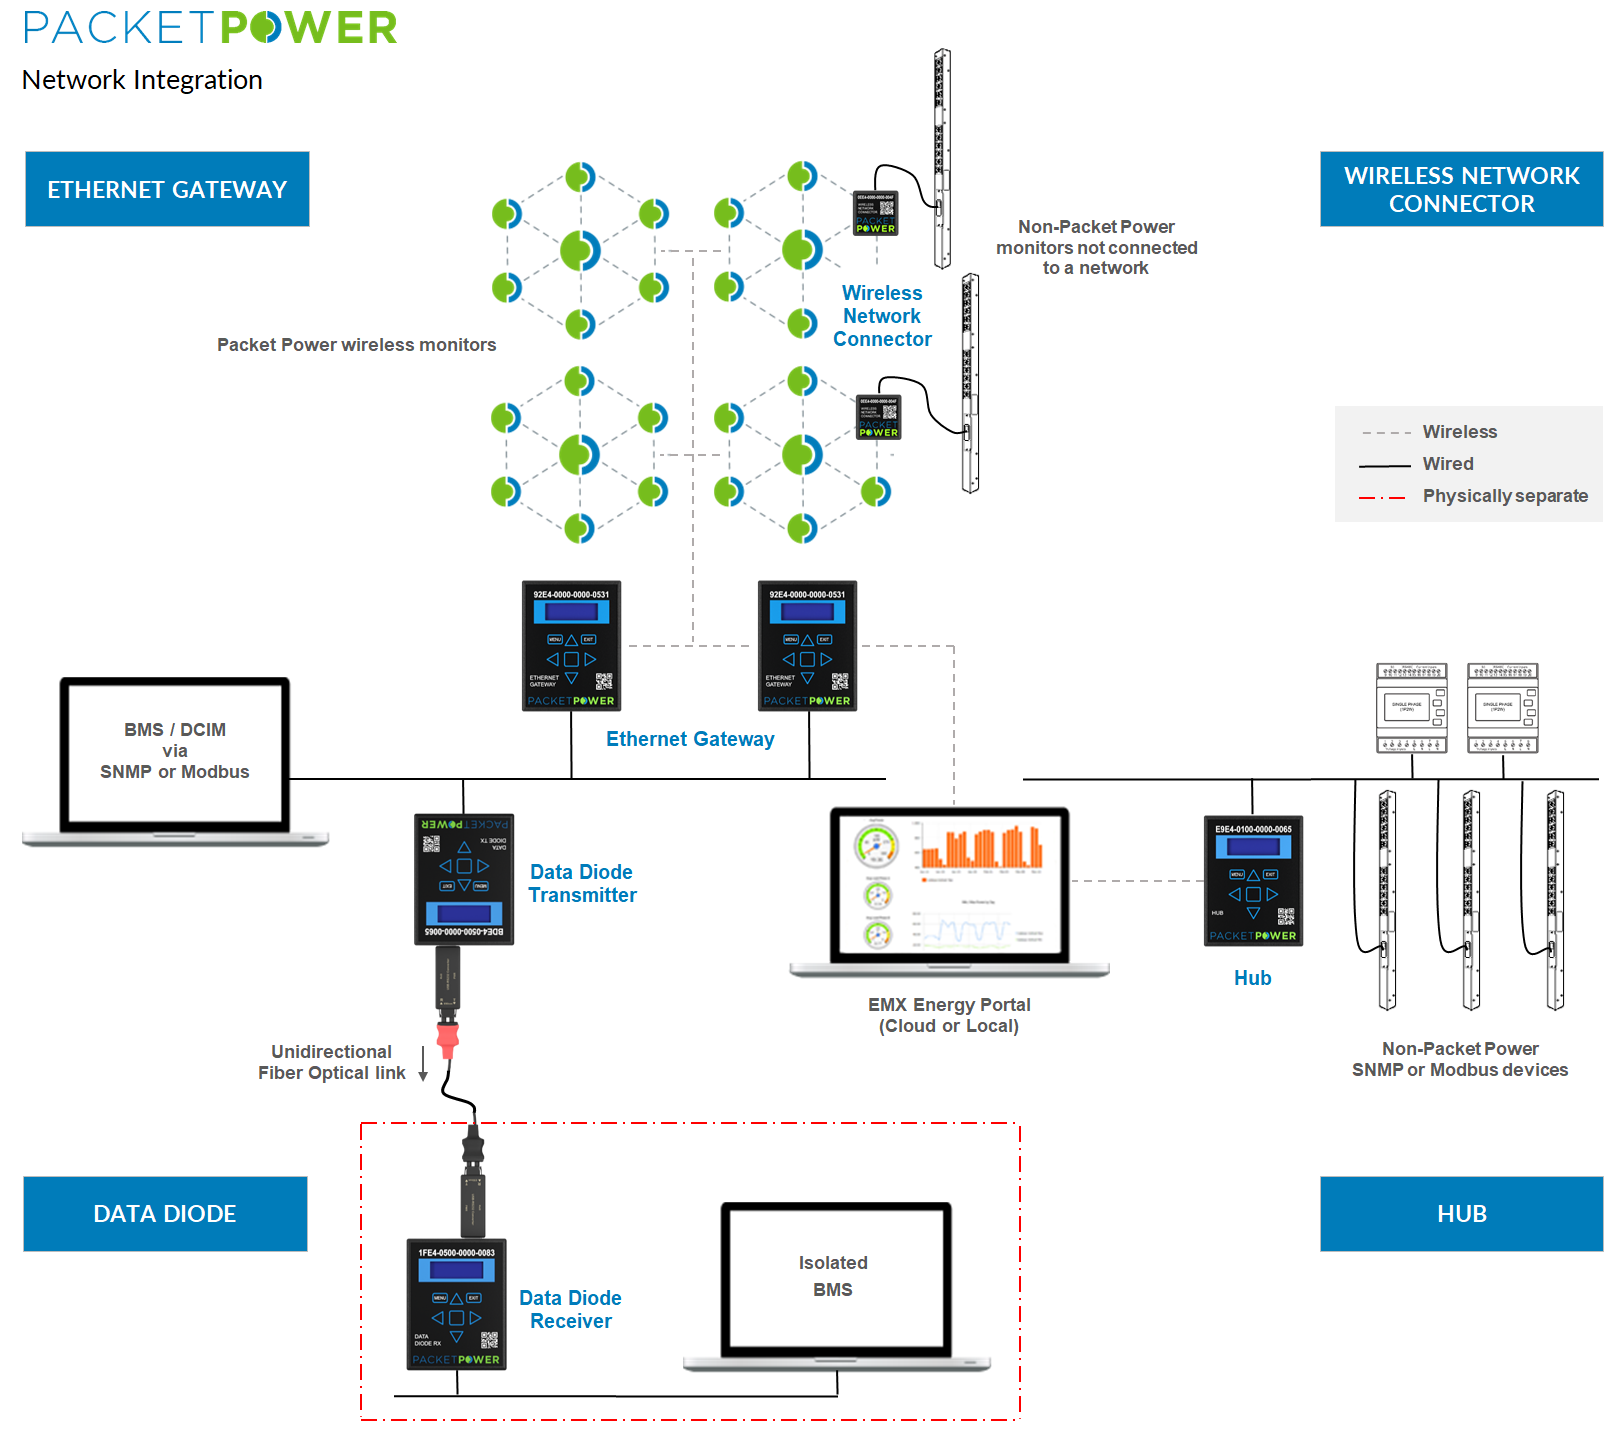 Packet Power Network Integration overview